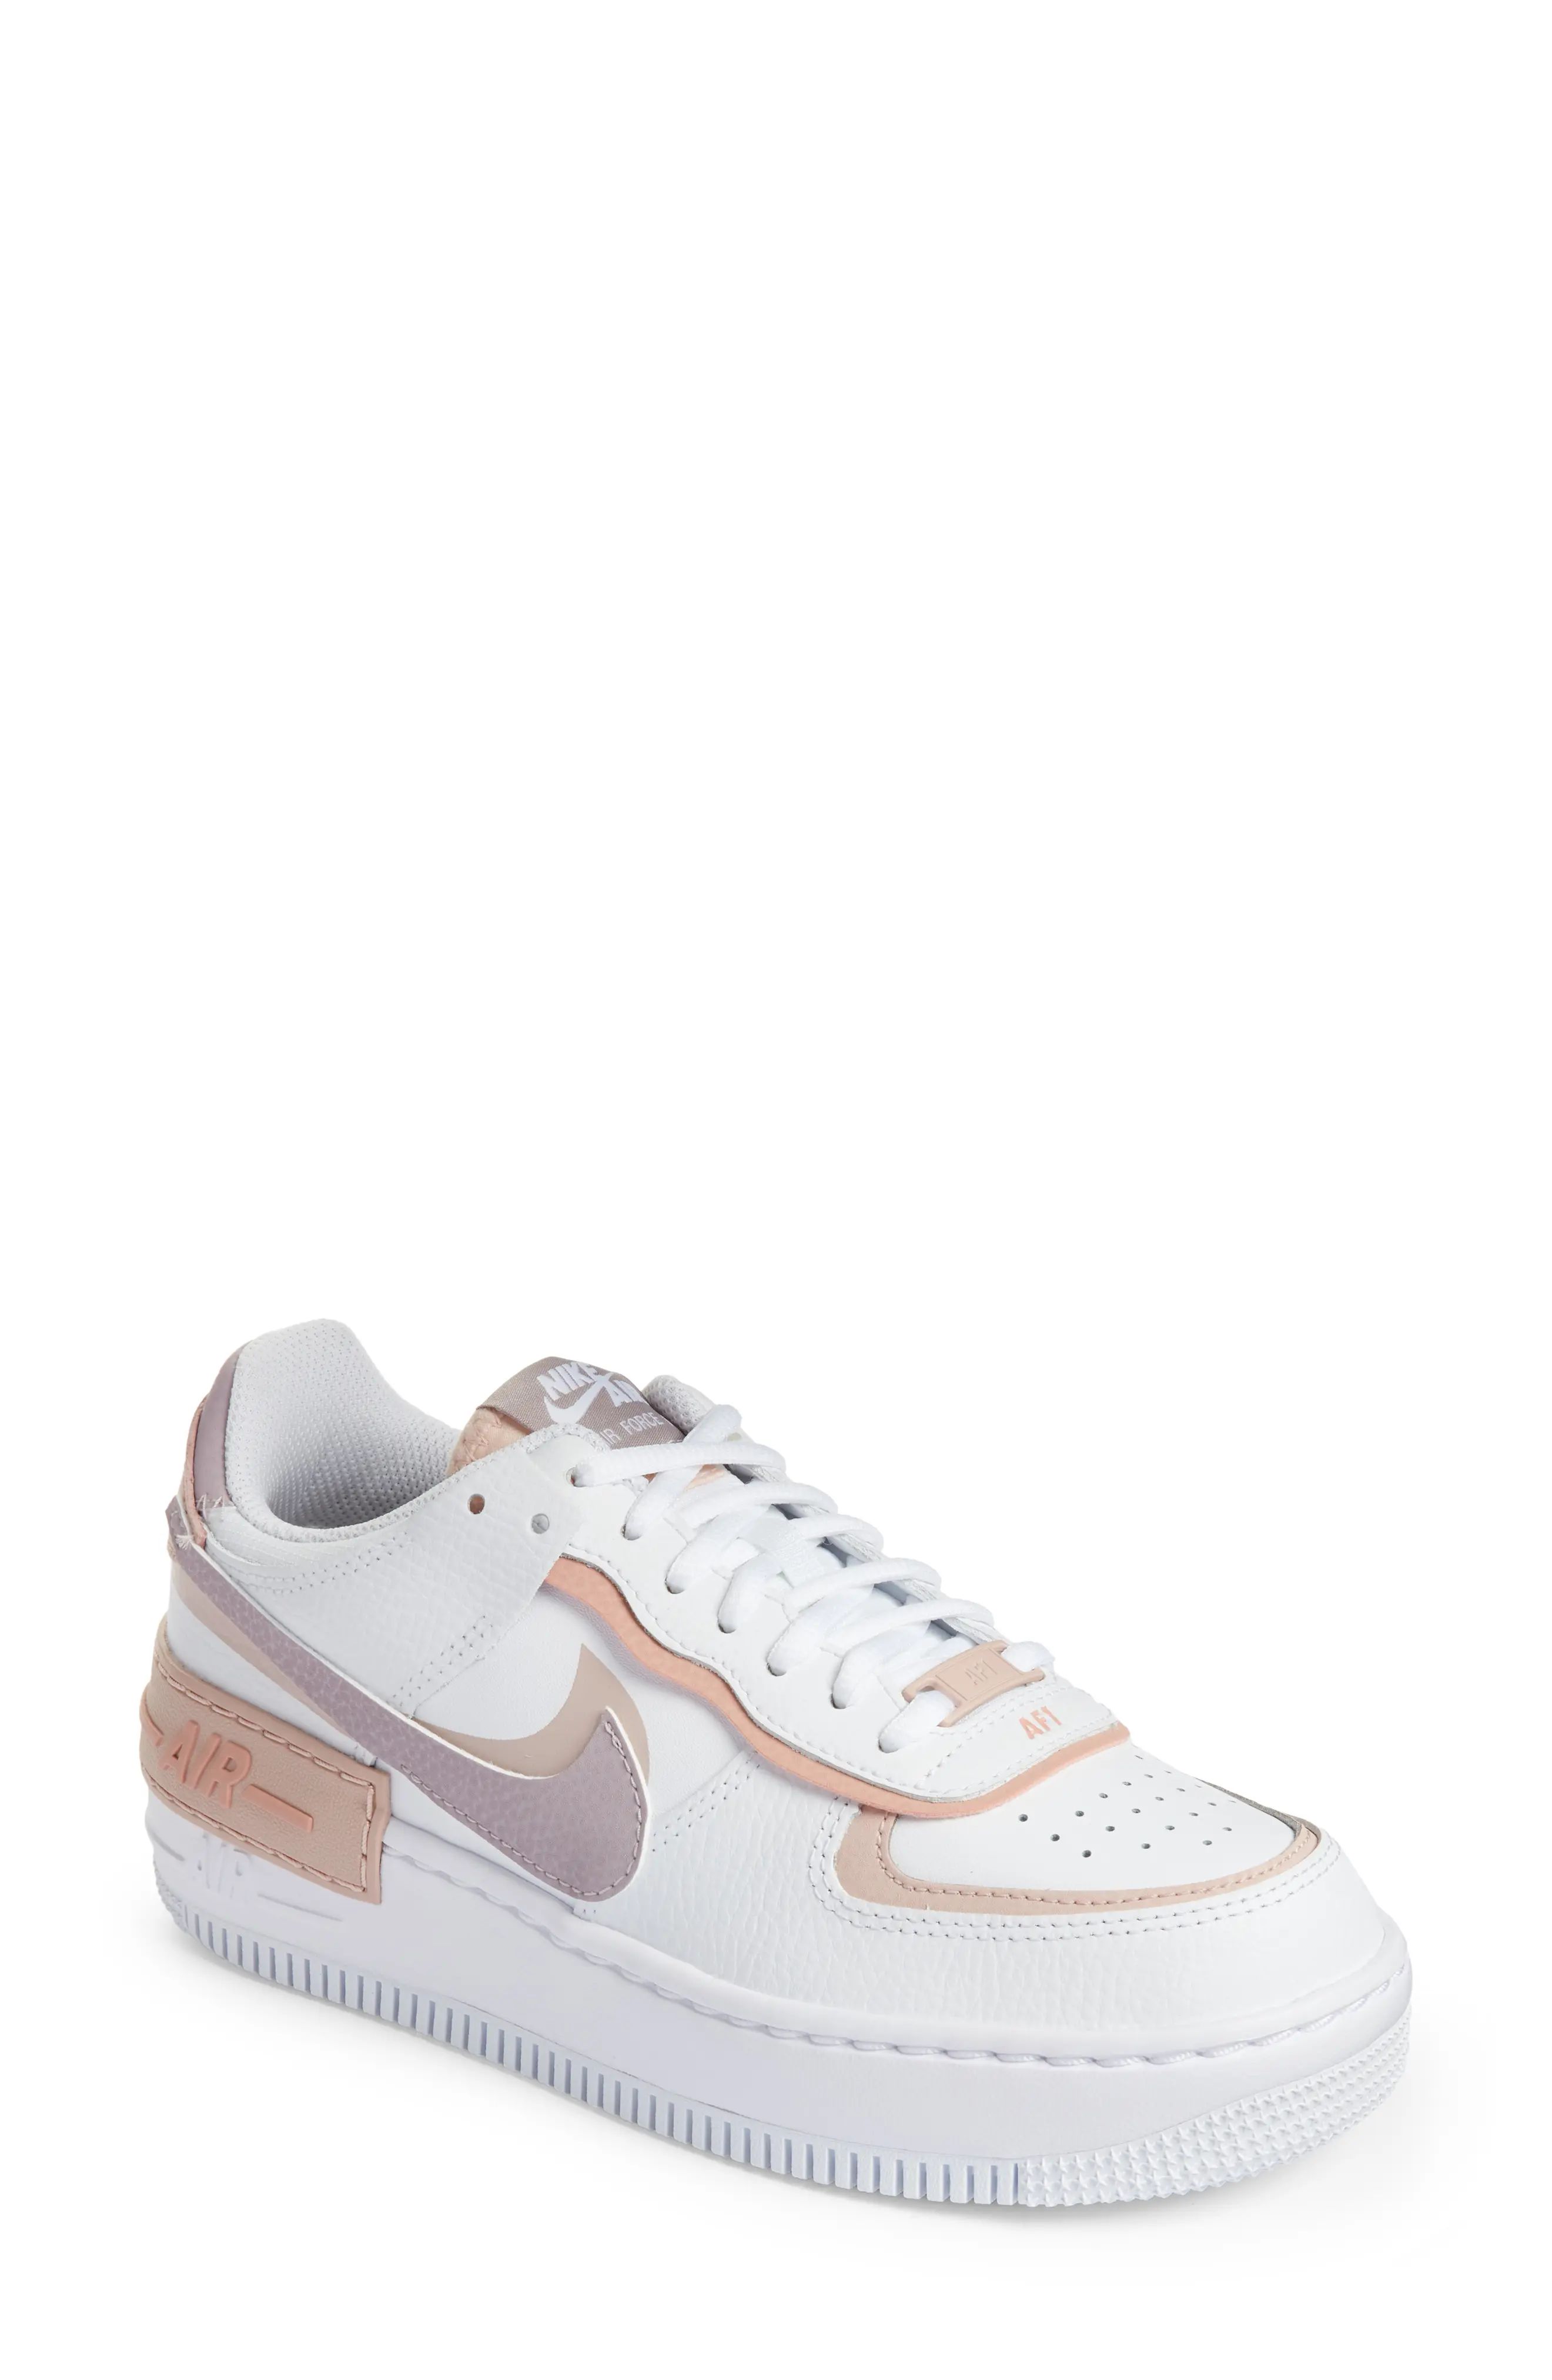 Nike Air Force 1 Shadow Sneaker in White/Amethyst Ash/Pink at Nordstrom, Size 6.5 | Nordstrom